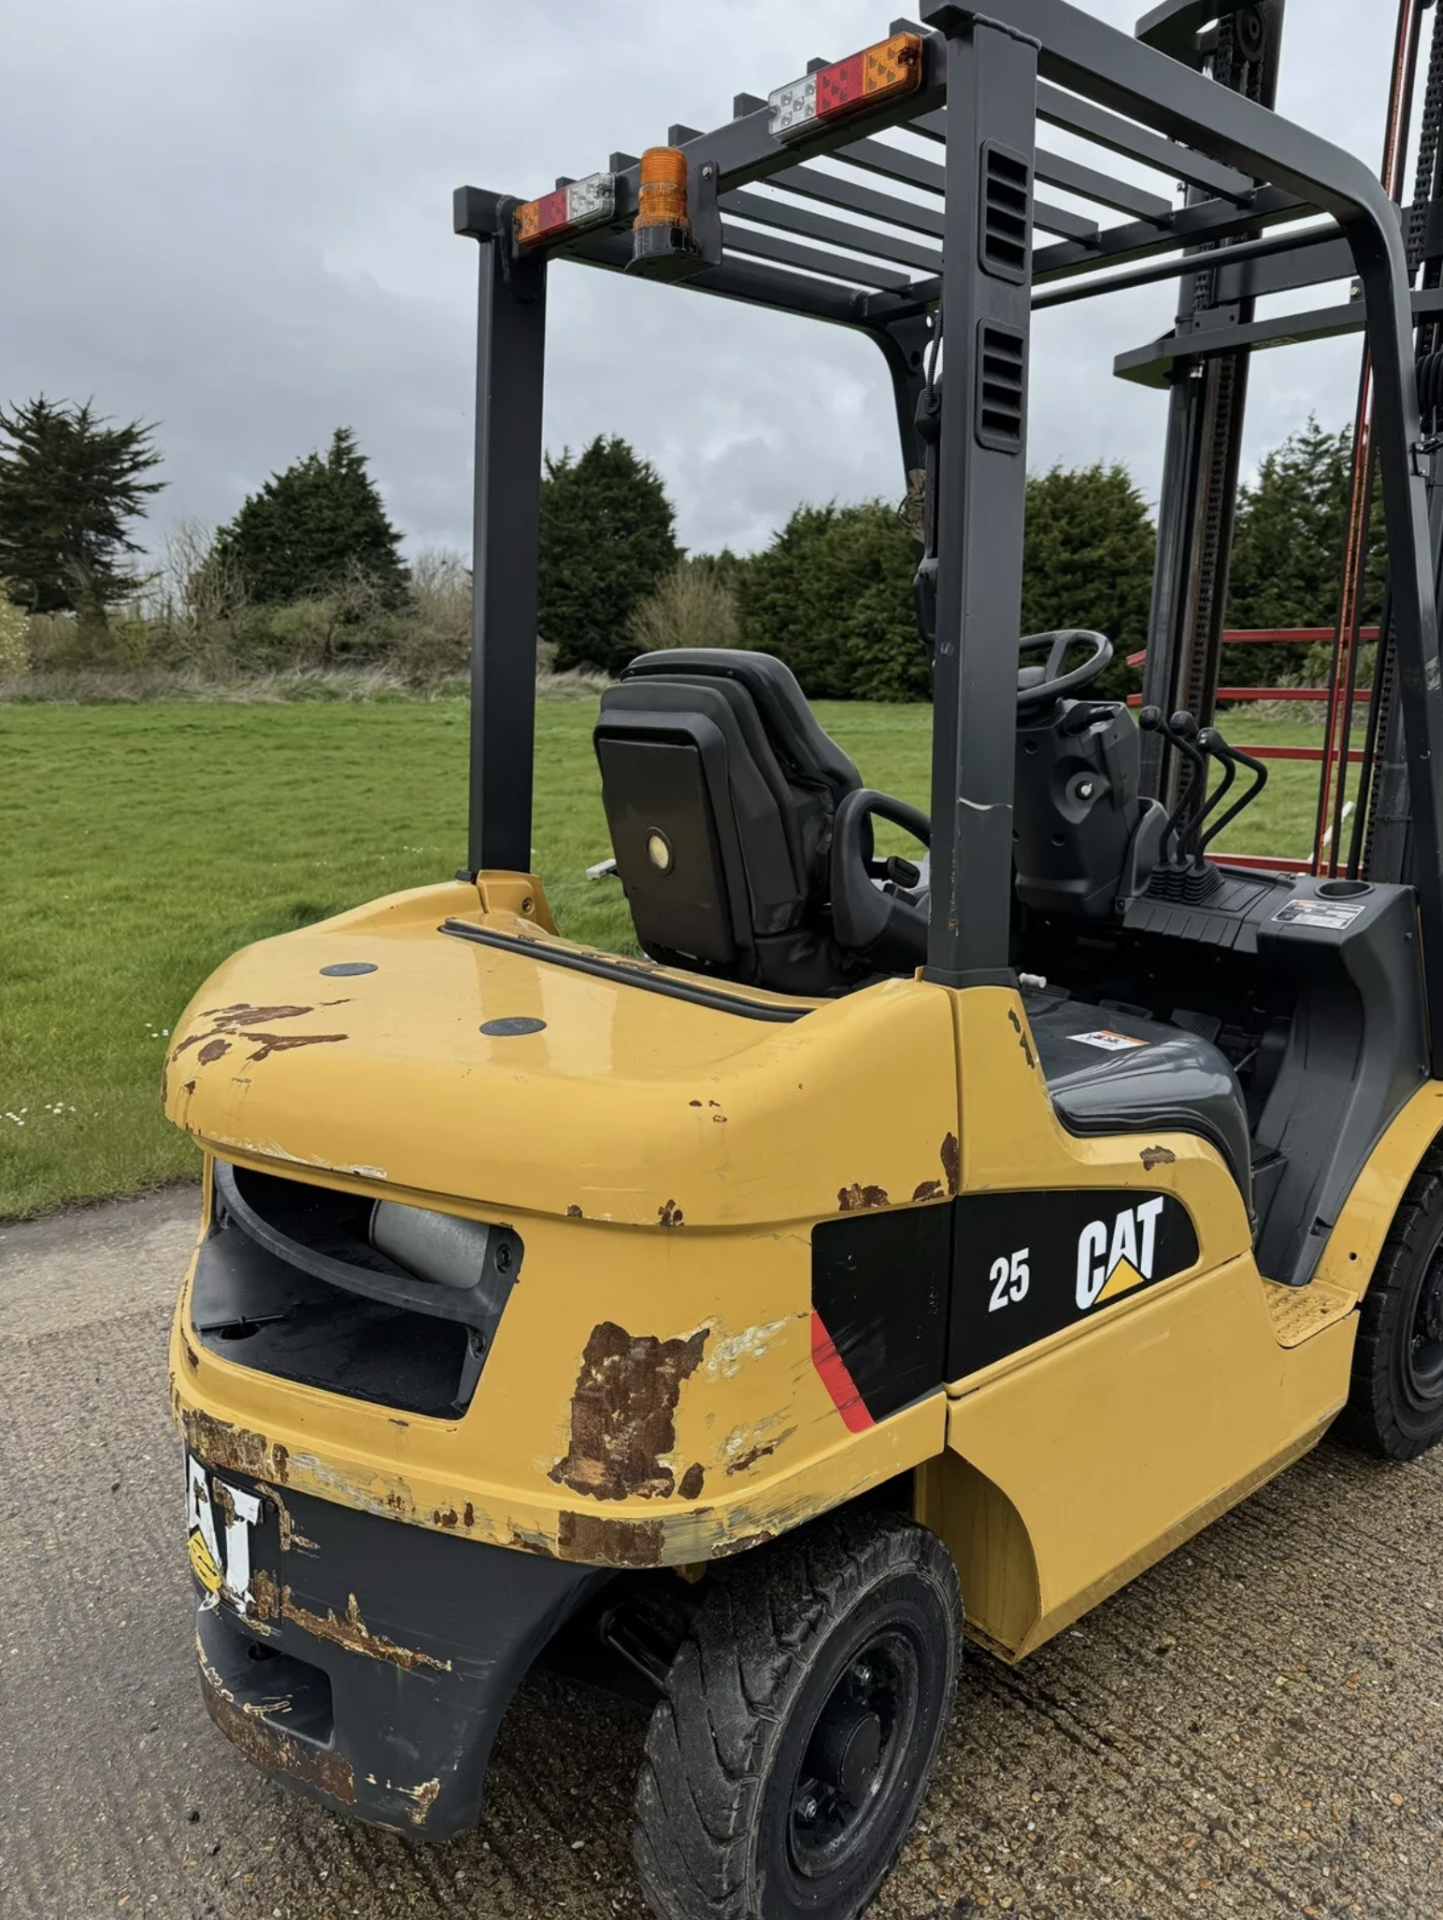 CATERPILLAR, 2.5 Tonne Diesel Forklift (2500 hours from new) - Image 4 of 5